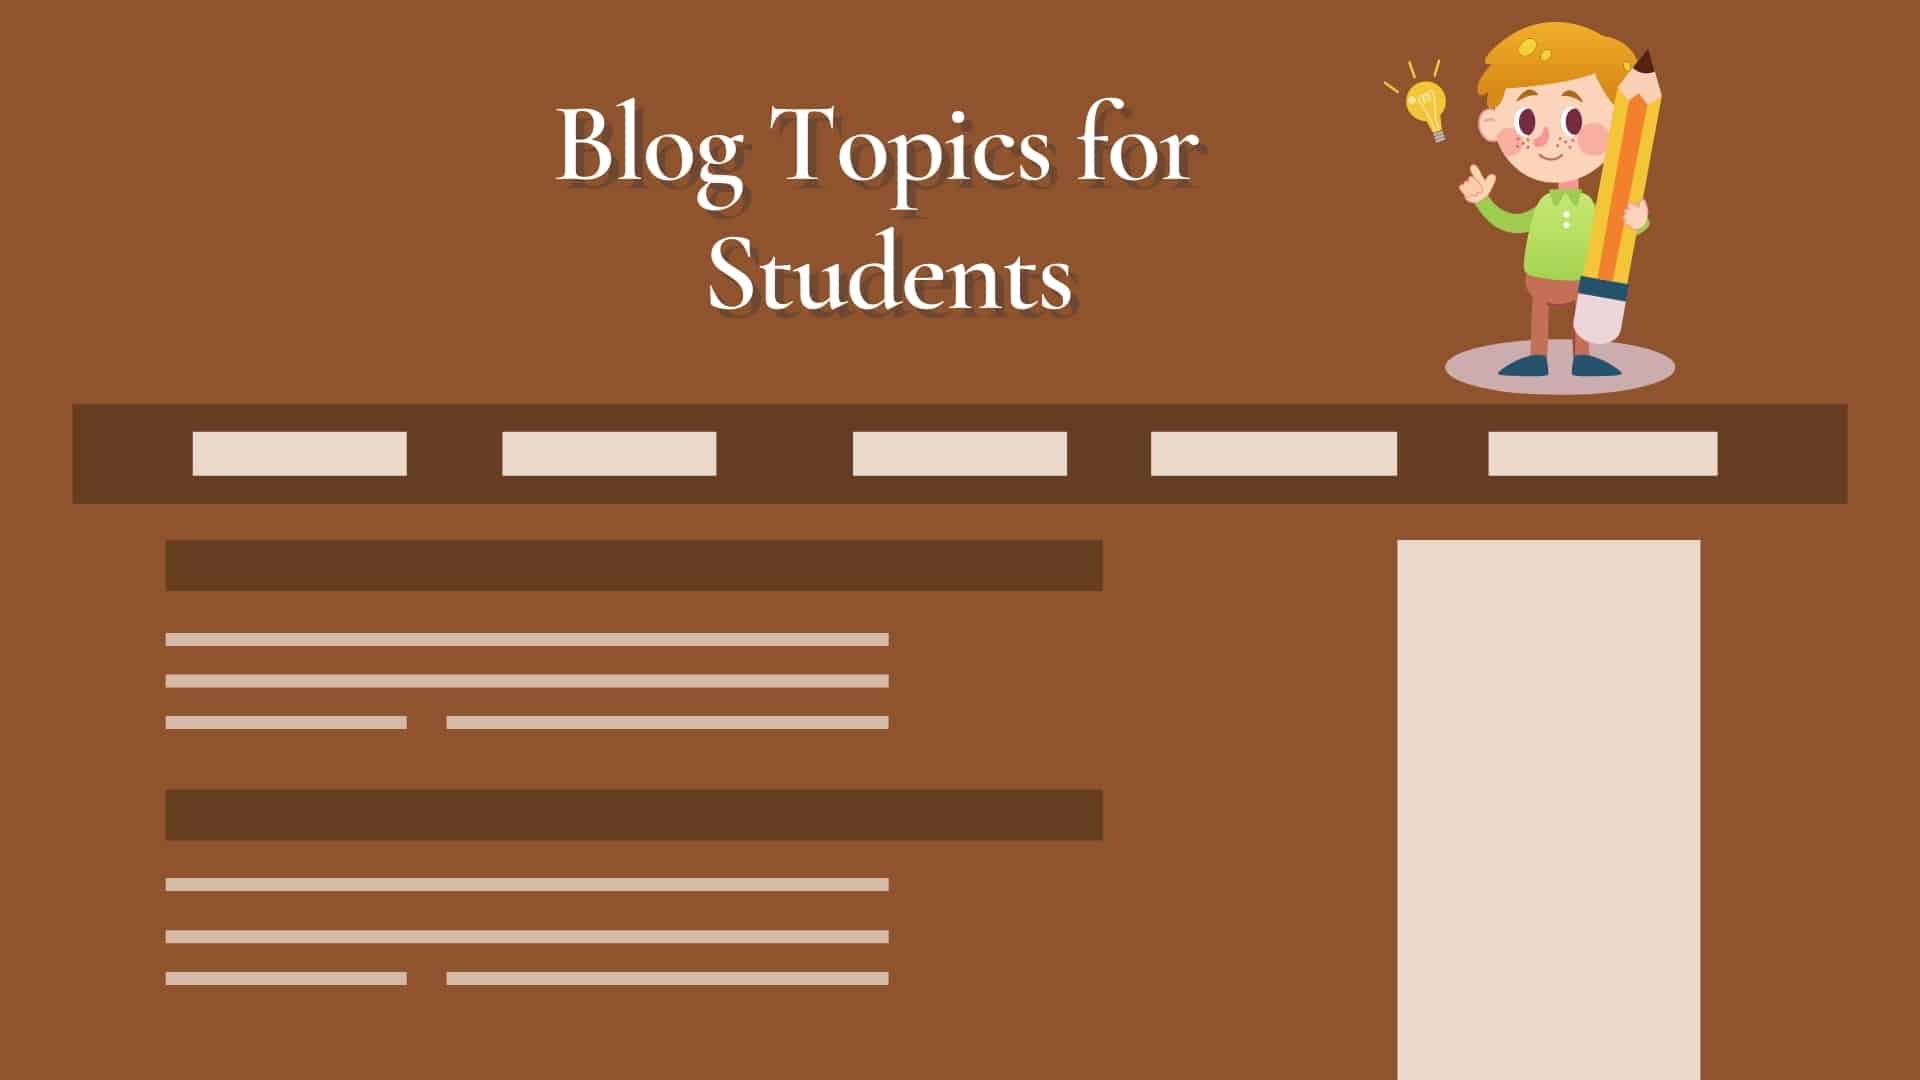 Blog Post Topic Ideas for College Students - Find Blog Topic Ideas and Post Ideas to Write About